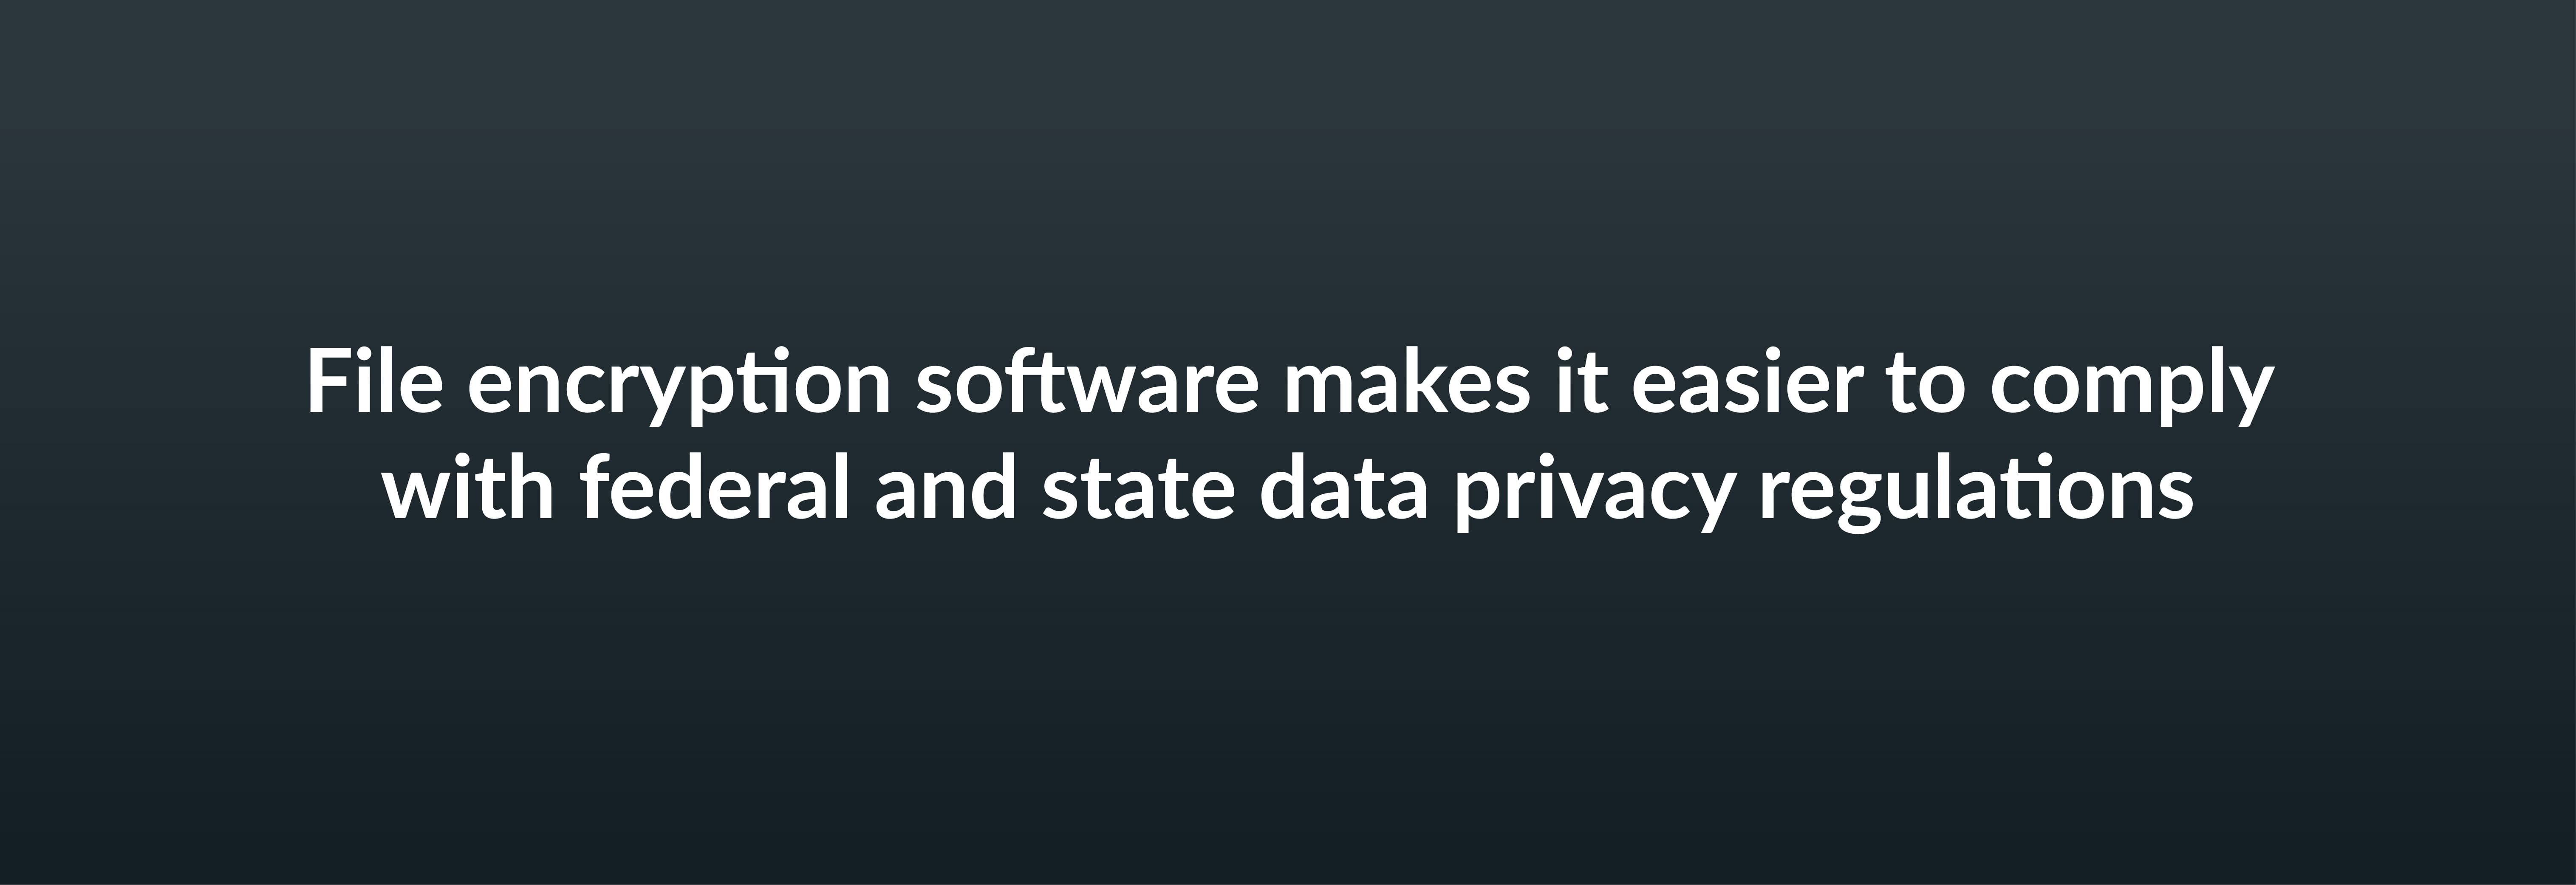 File encryption software makes it easier to comply with federal and state data privacy regulations